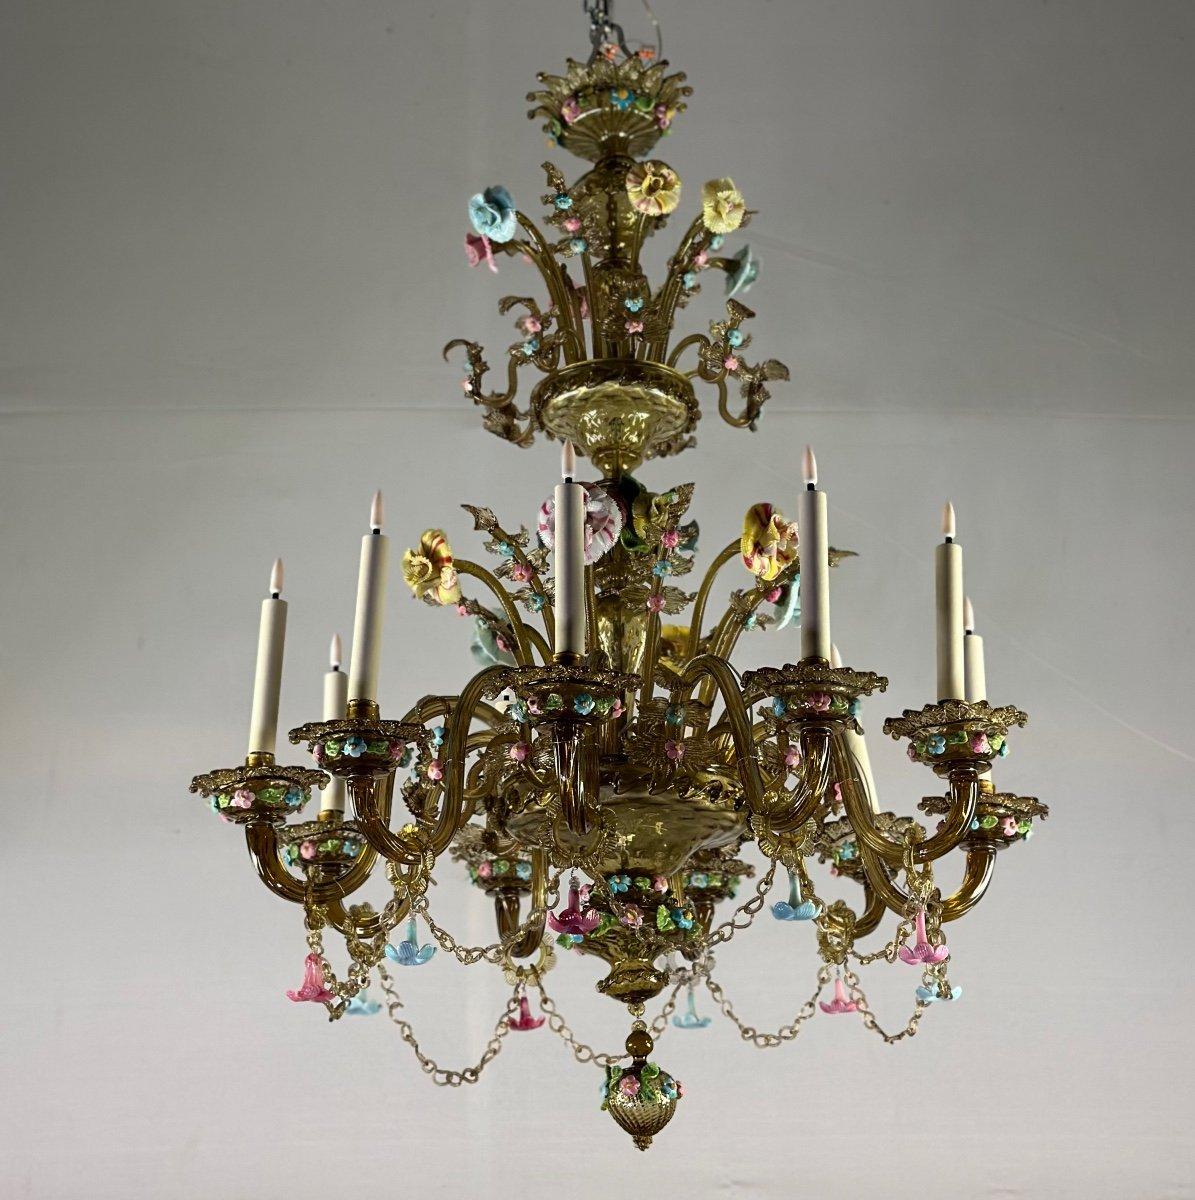 Venetian Chandelier In Multicolored Murano Glass With Green Dominance, Circa 1880. 10 sconces, new electrification